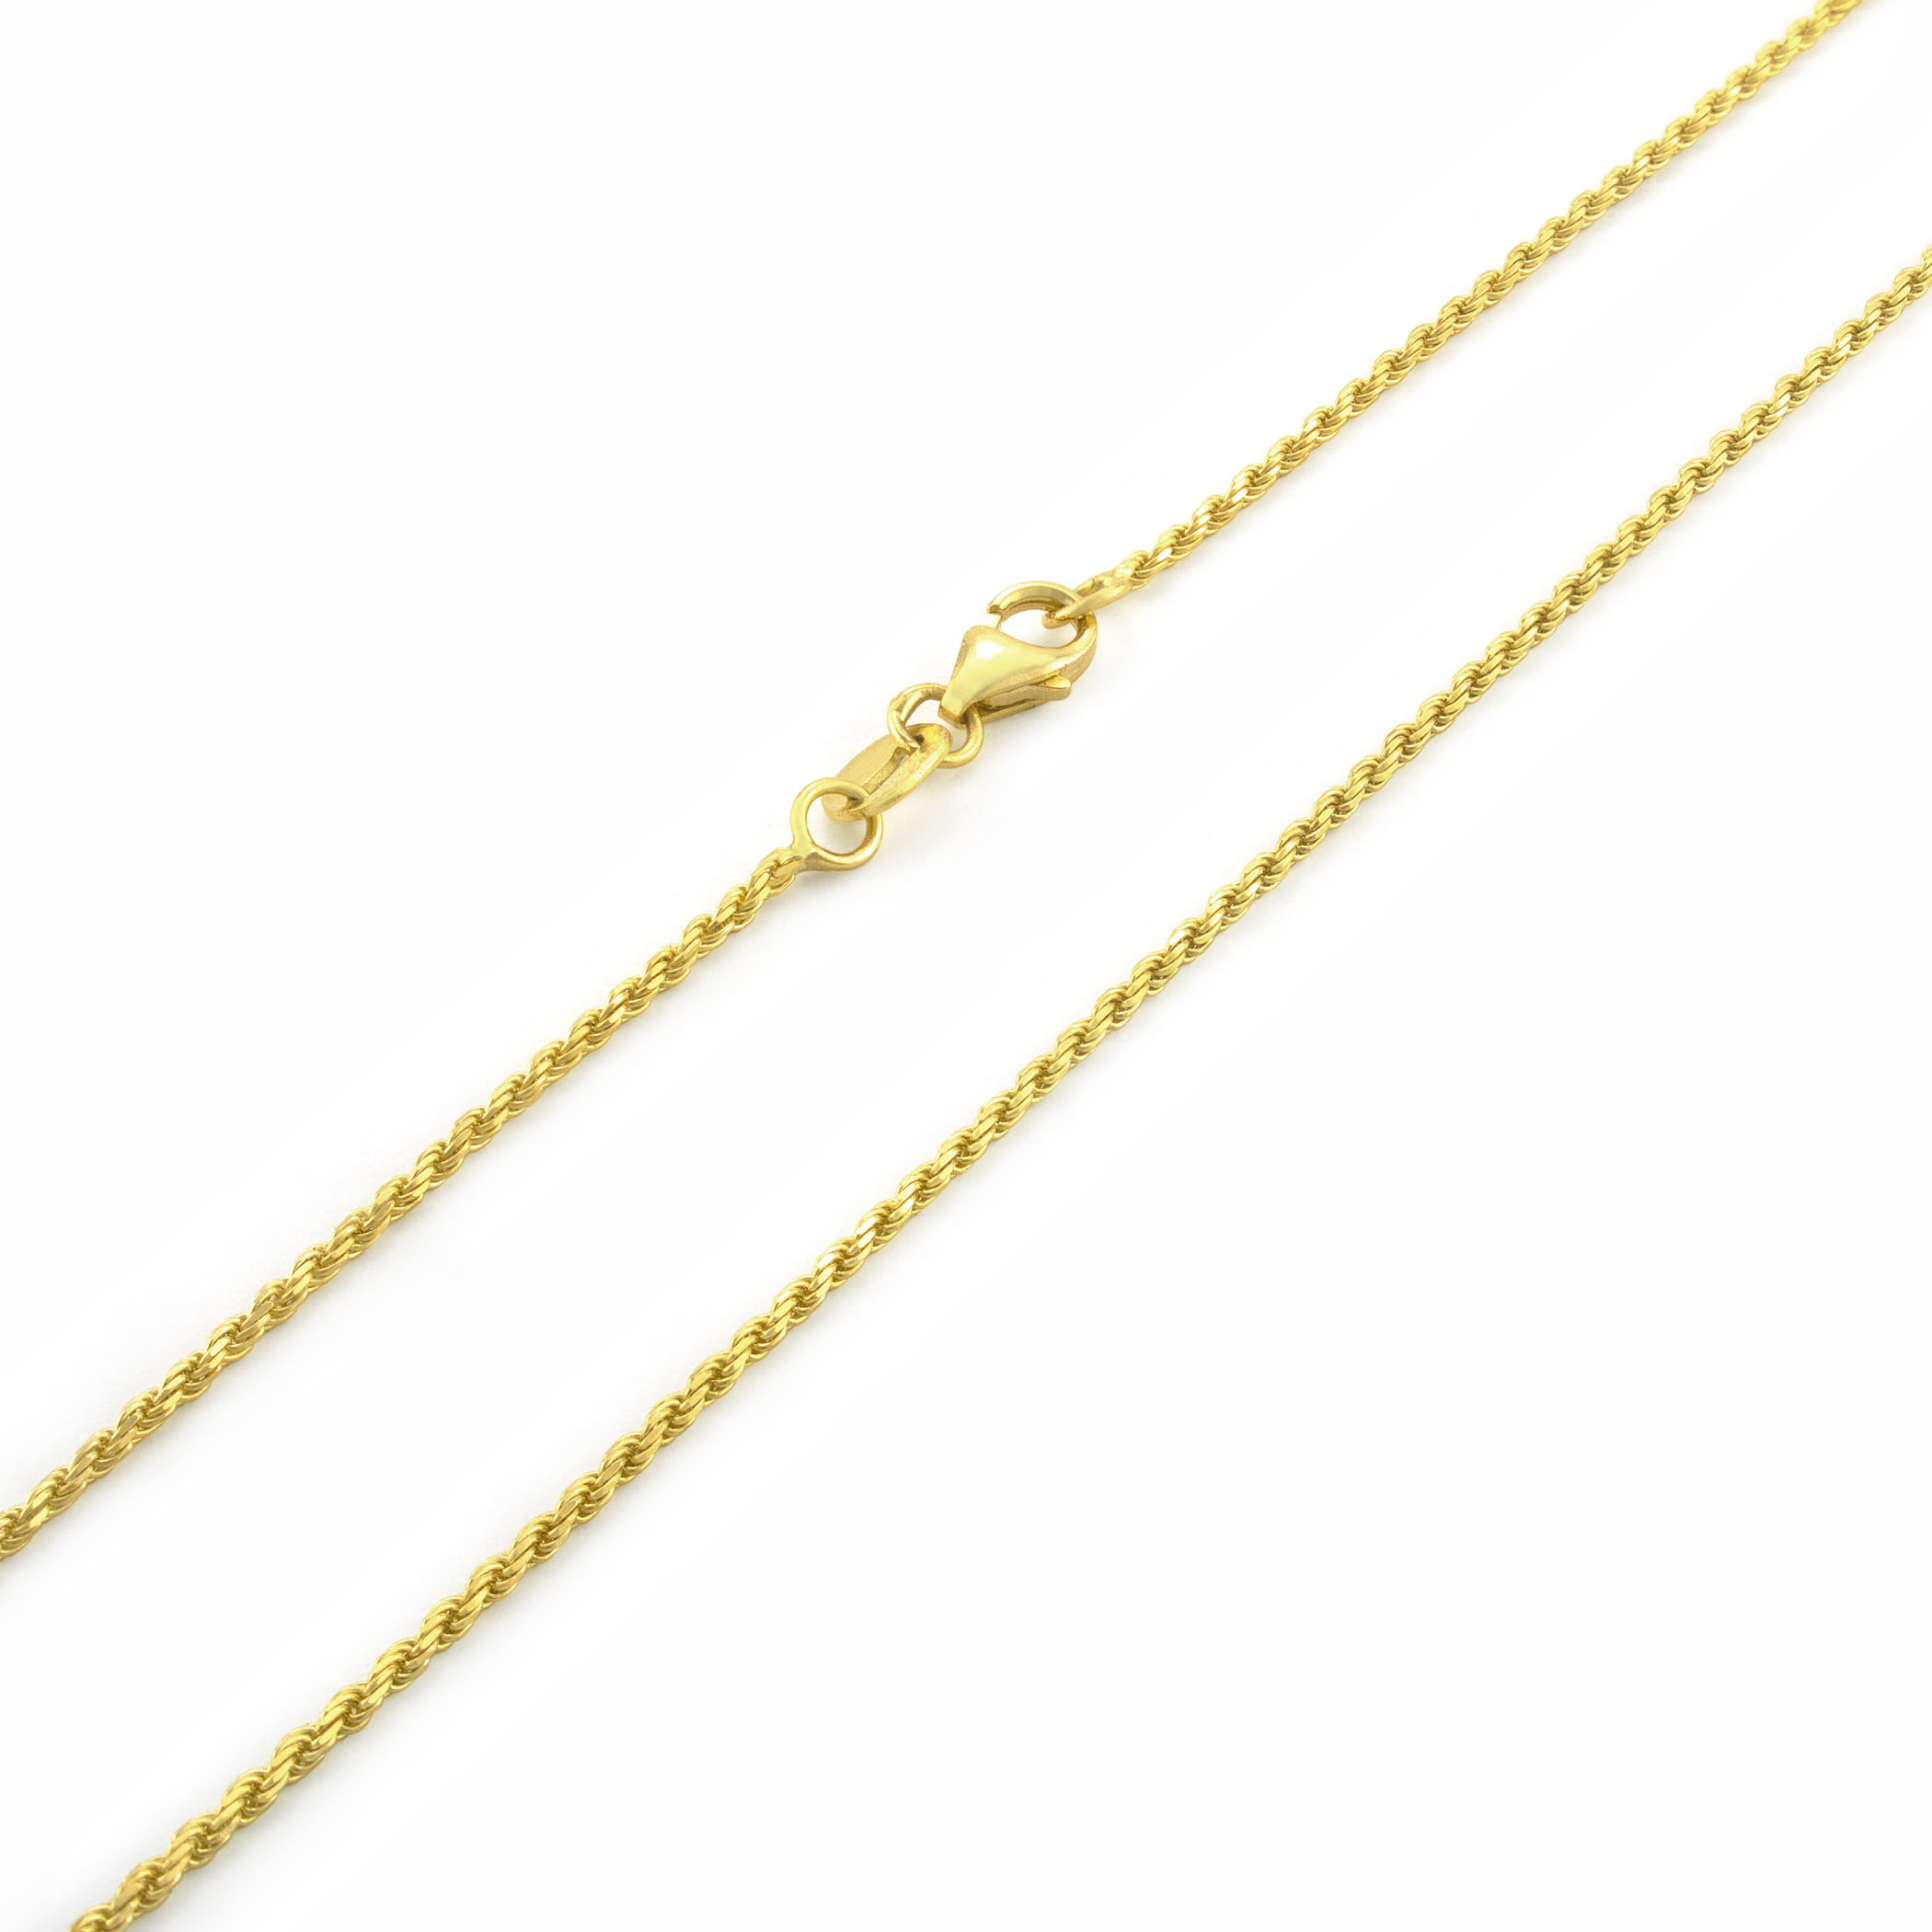 Nuragold - 14k Yellow Gold Solid 1mm Thin Rope Chain Pendant Necklace ...